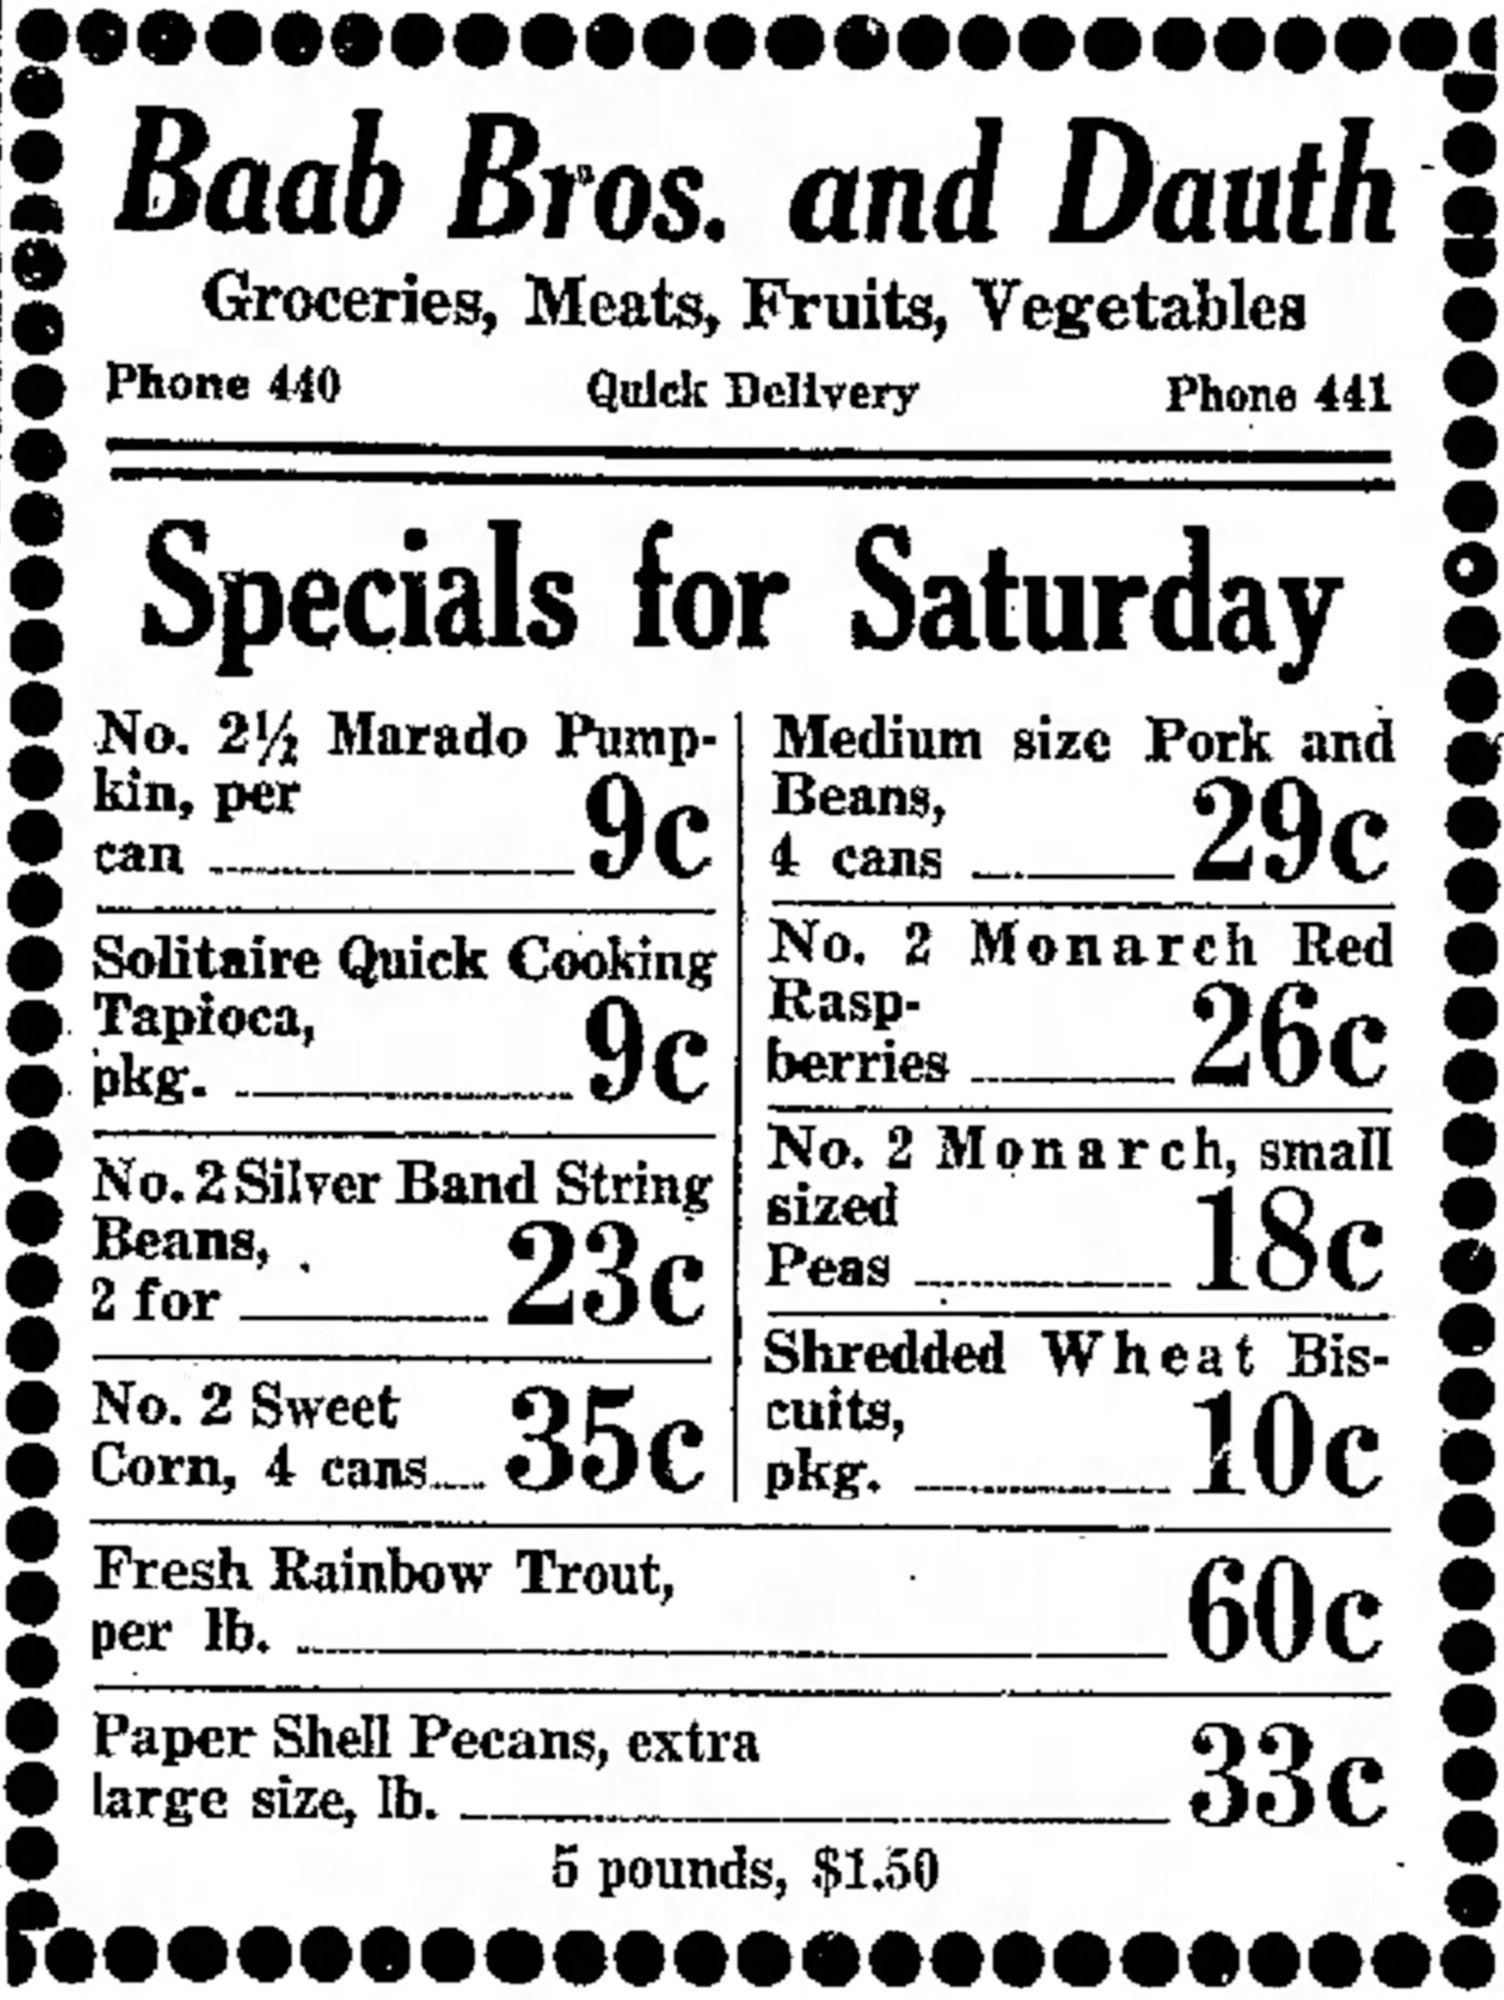 Dauth Family Archive - 1931-11-20 - Greeley Daily Tribune - Baab Bros and Dauth Advertisement